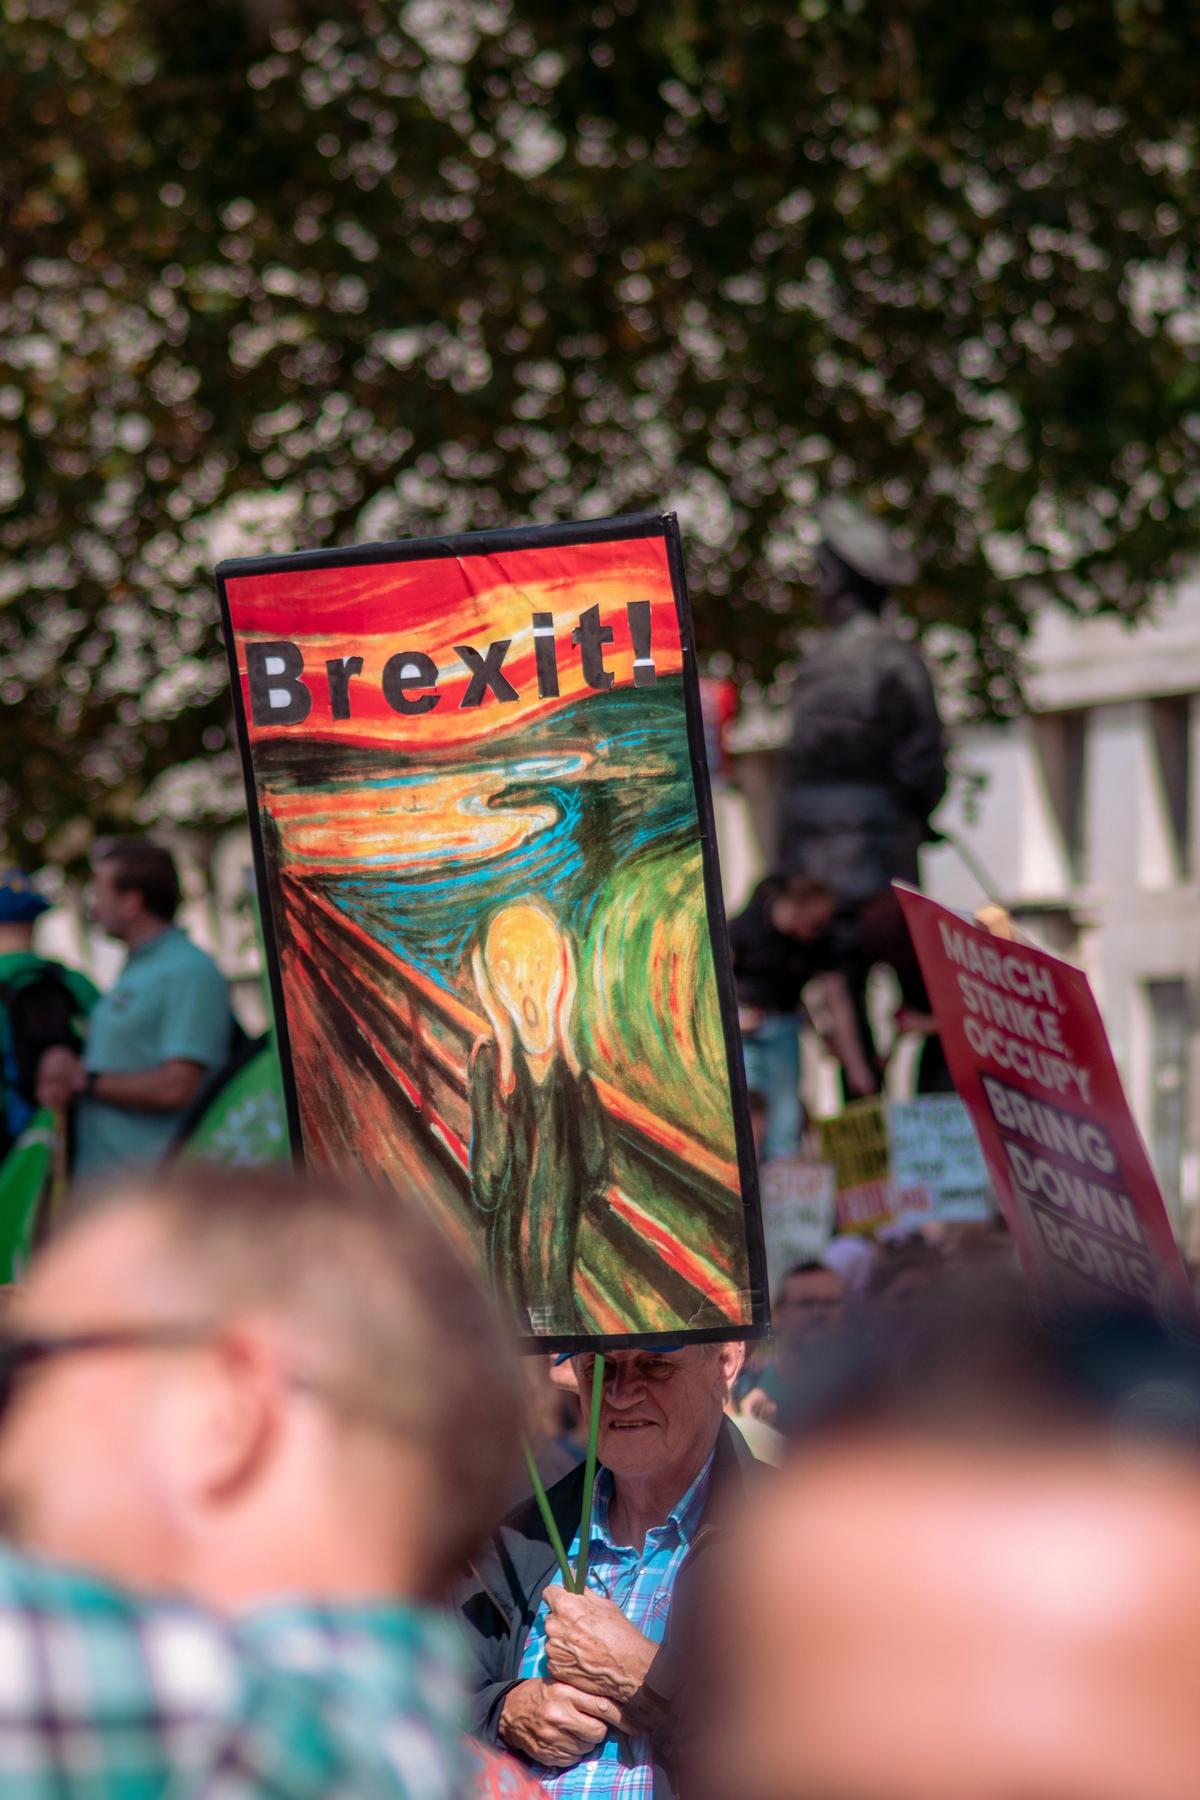 Deal or no deal? We look at what Brexit means for the art market Photo: Fred Moon/Unsplash